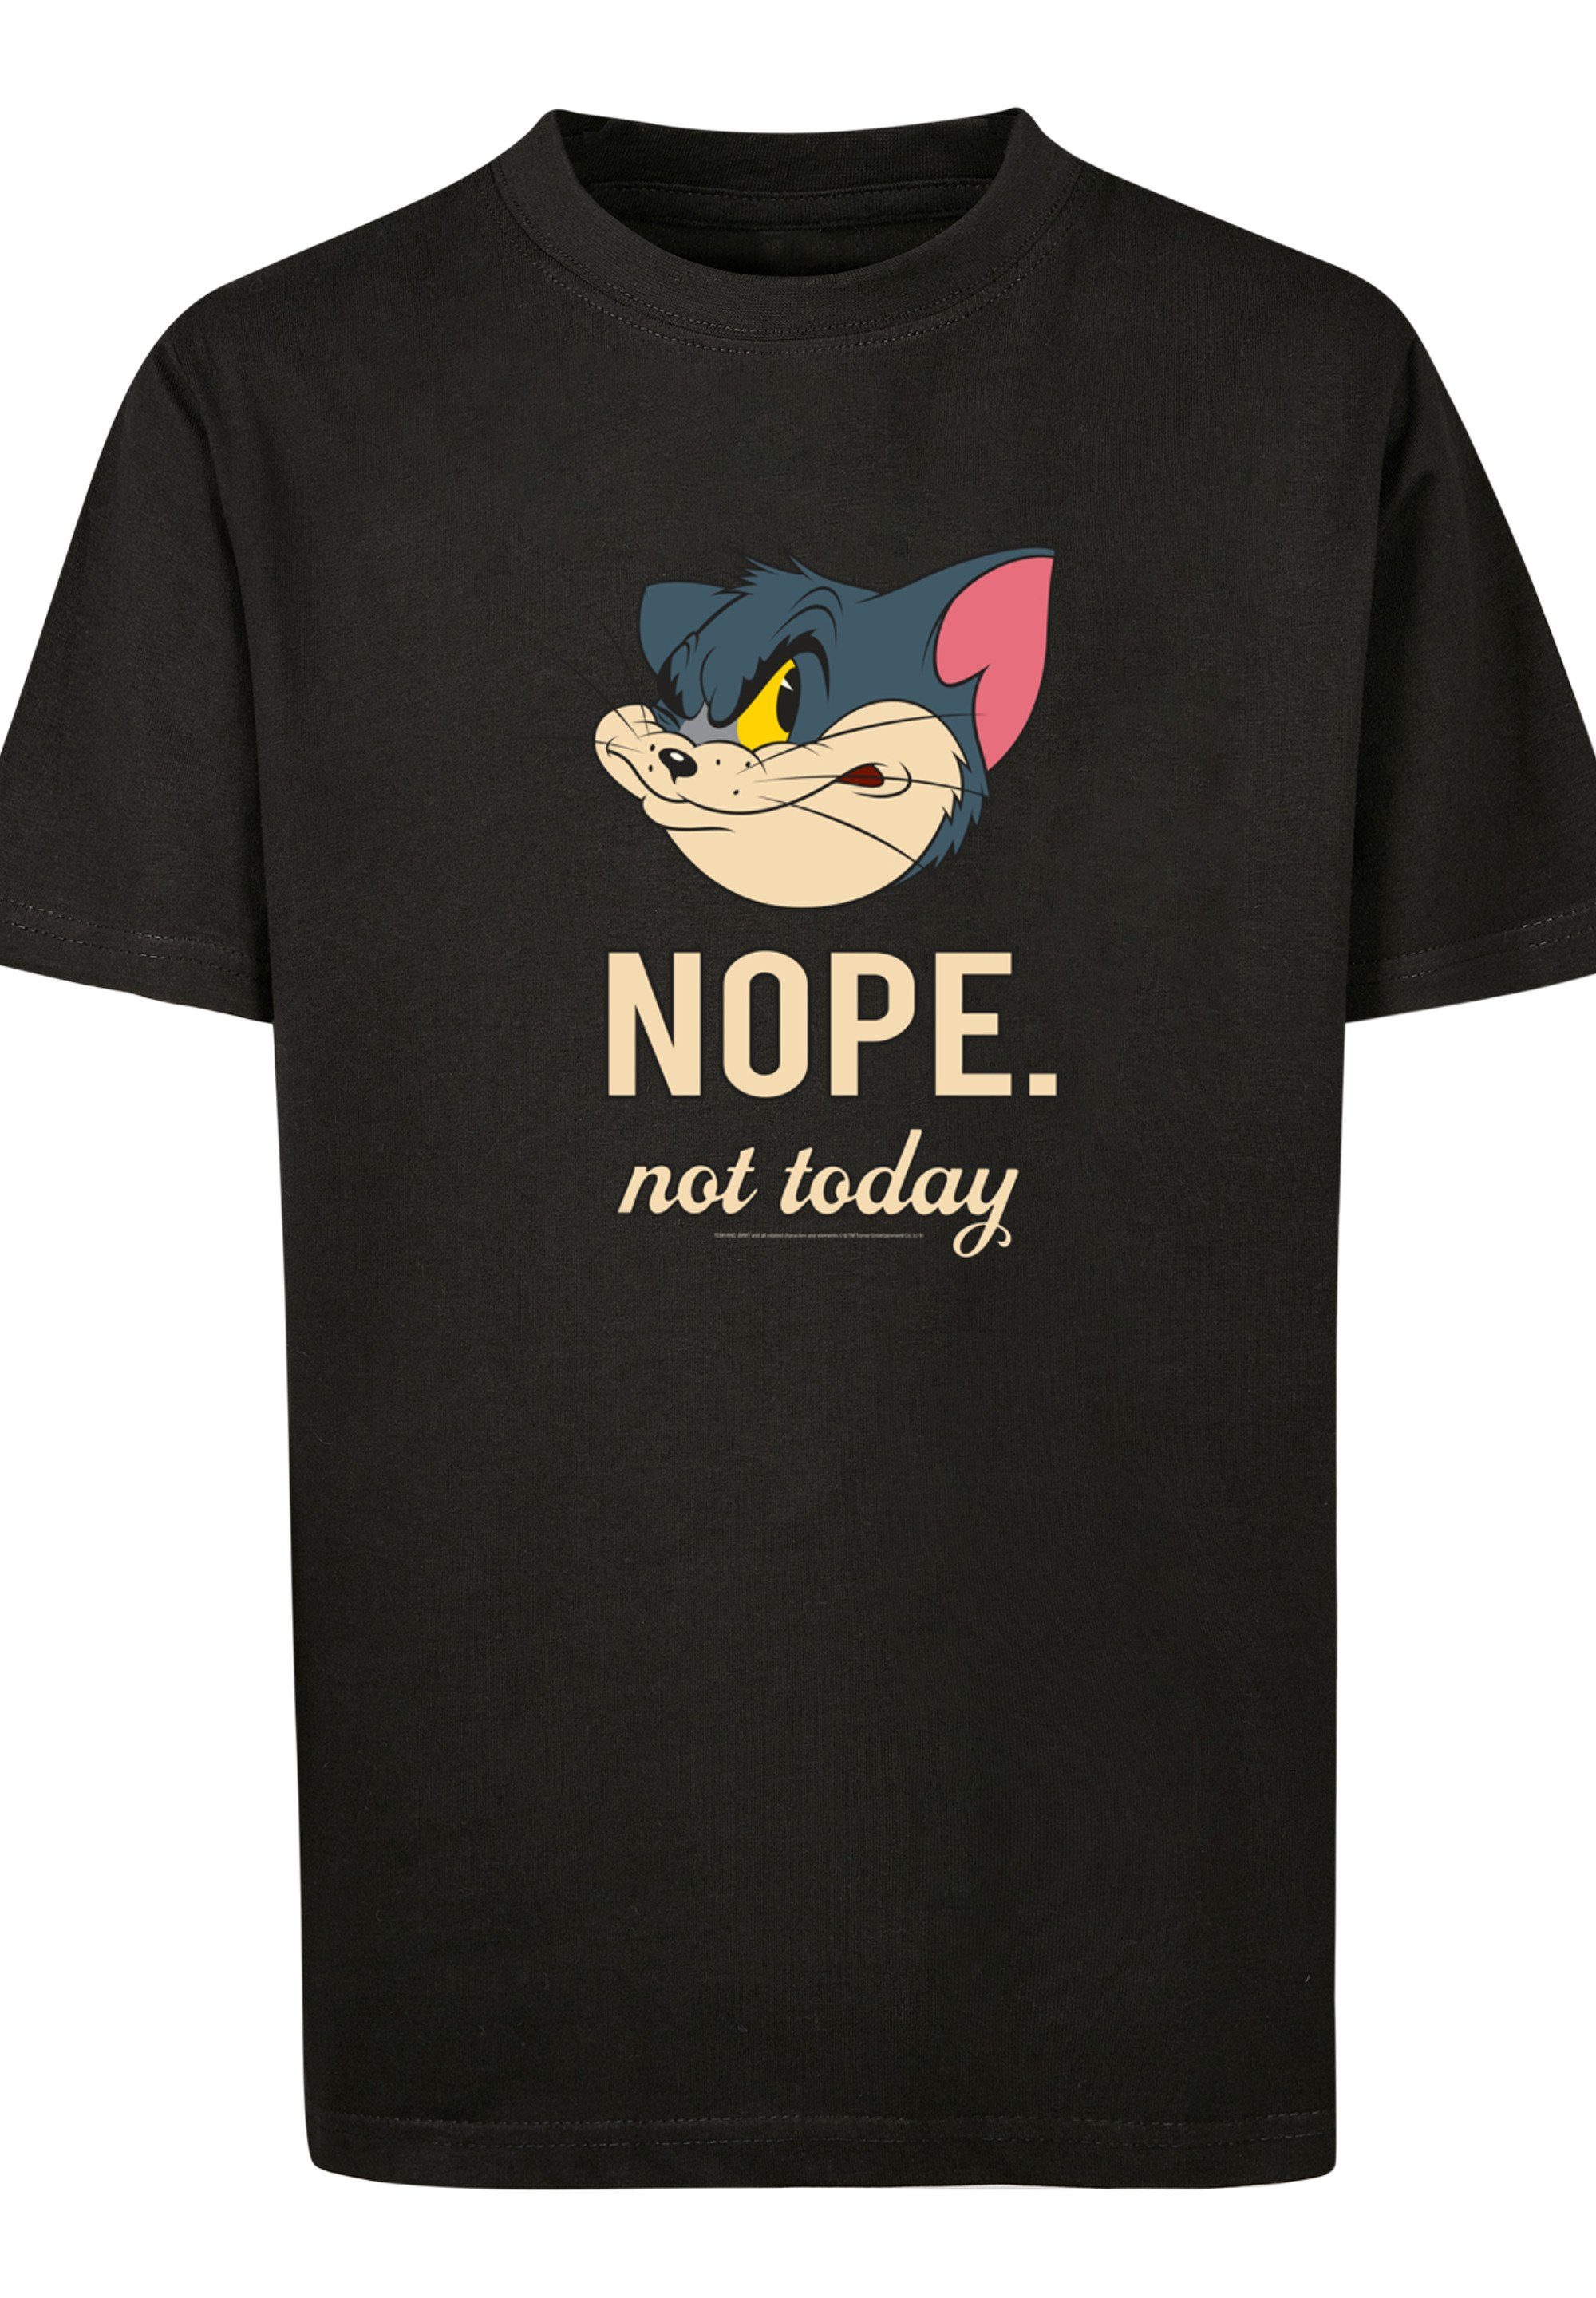 Nope and F4NT4STIC Serie TV T-Shirt Jerry Not schwarz Today Tom Print